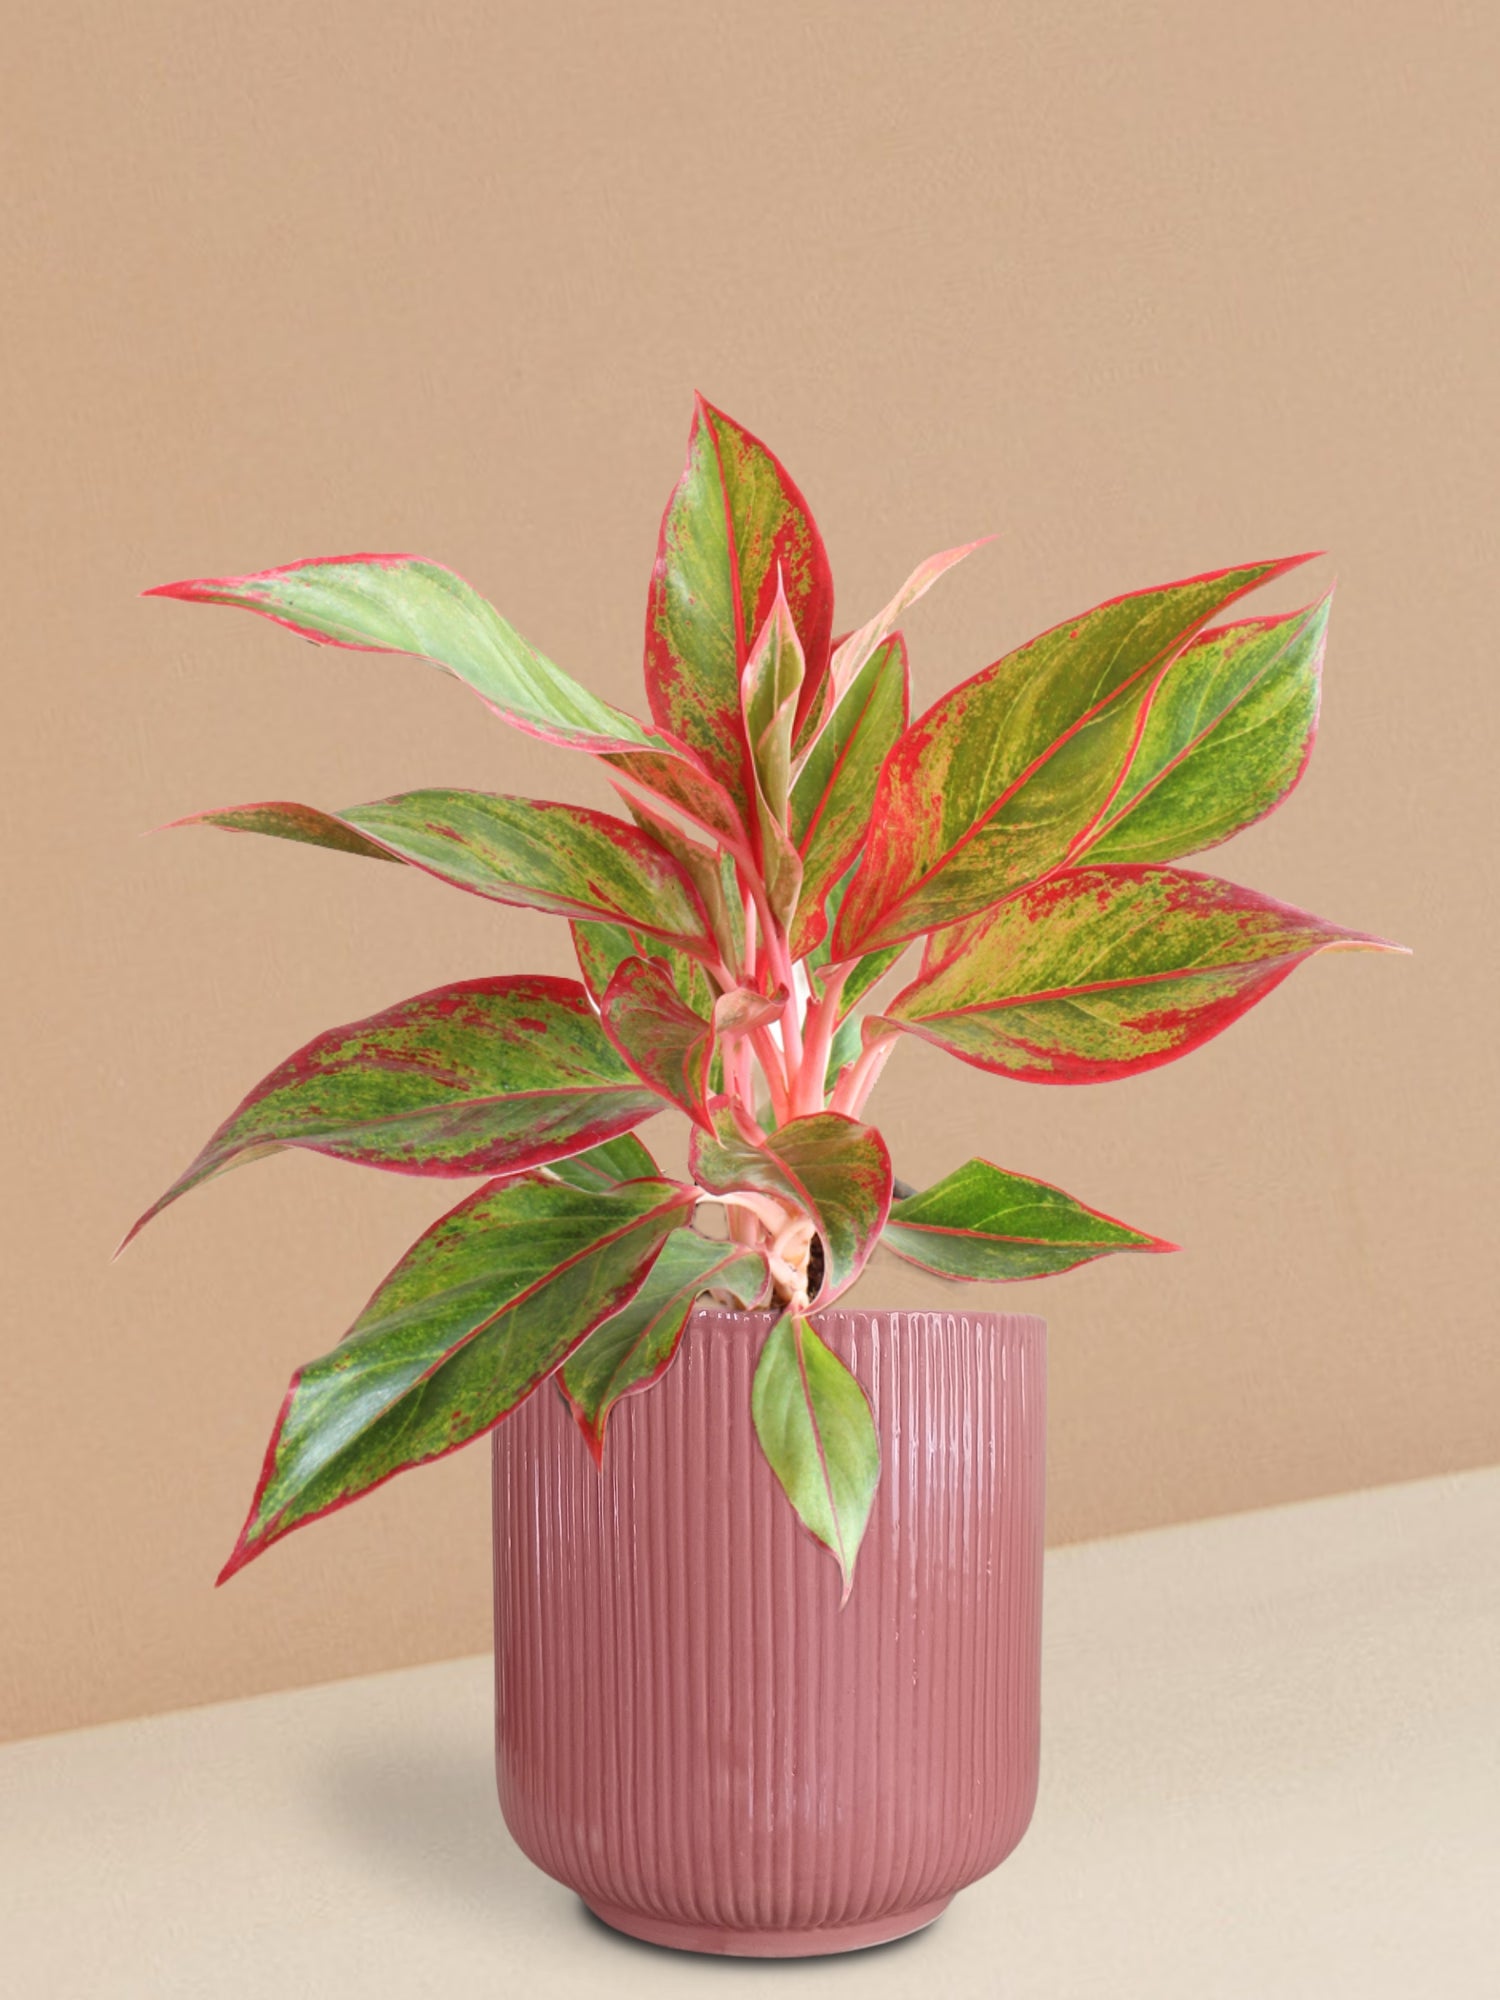 Rare and Exotic Aglaonema Varieties for Plant Enthusiasts